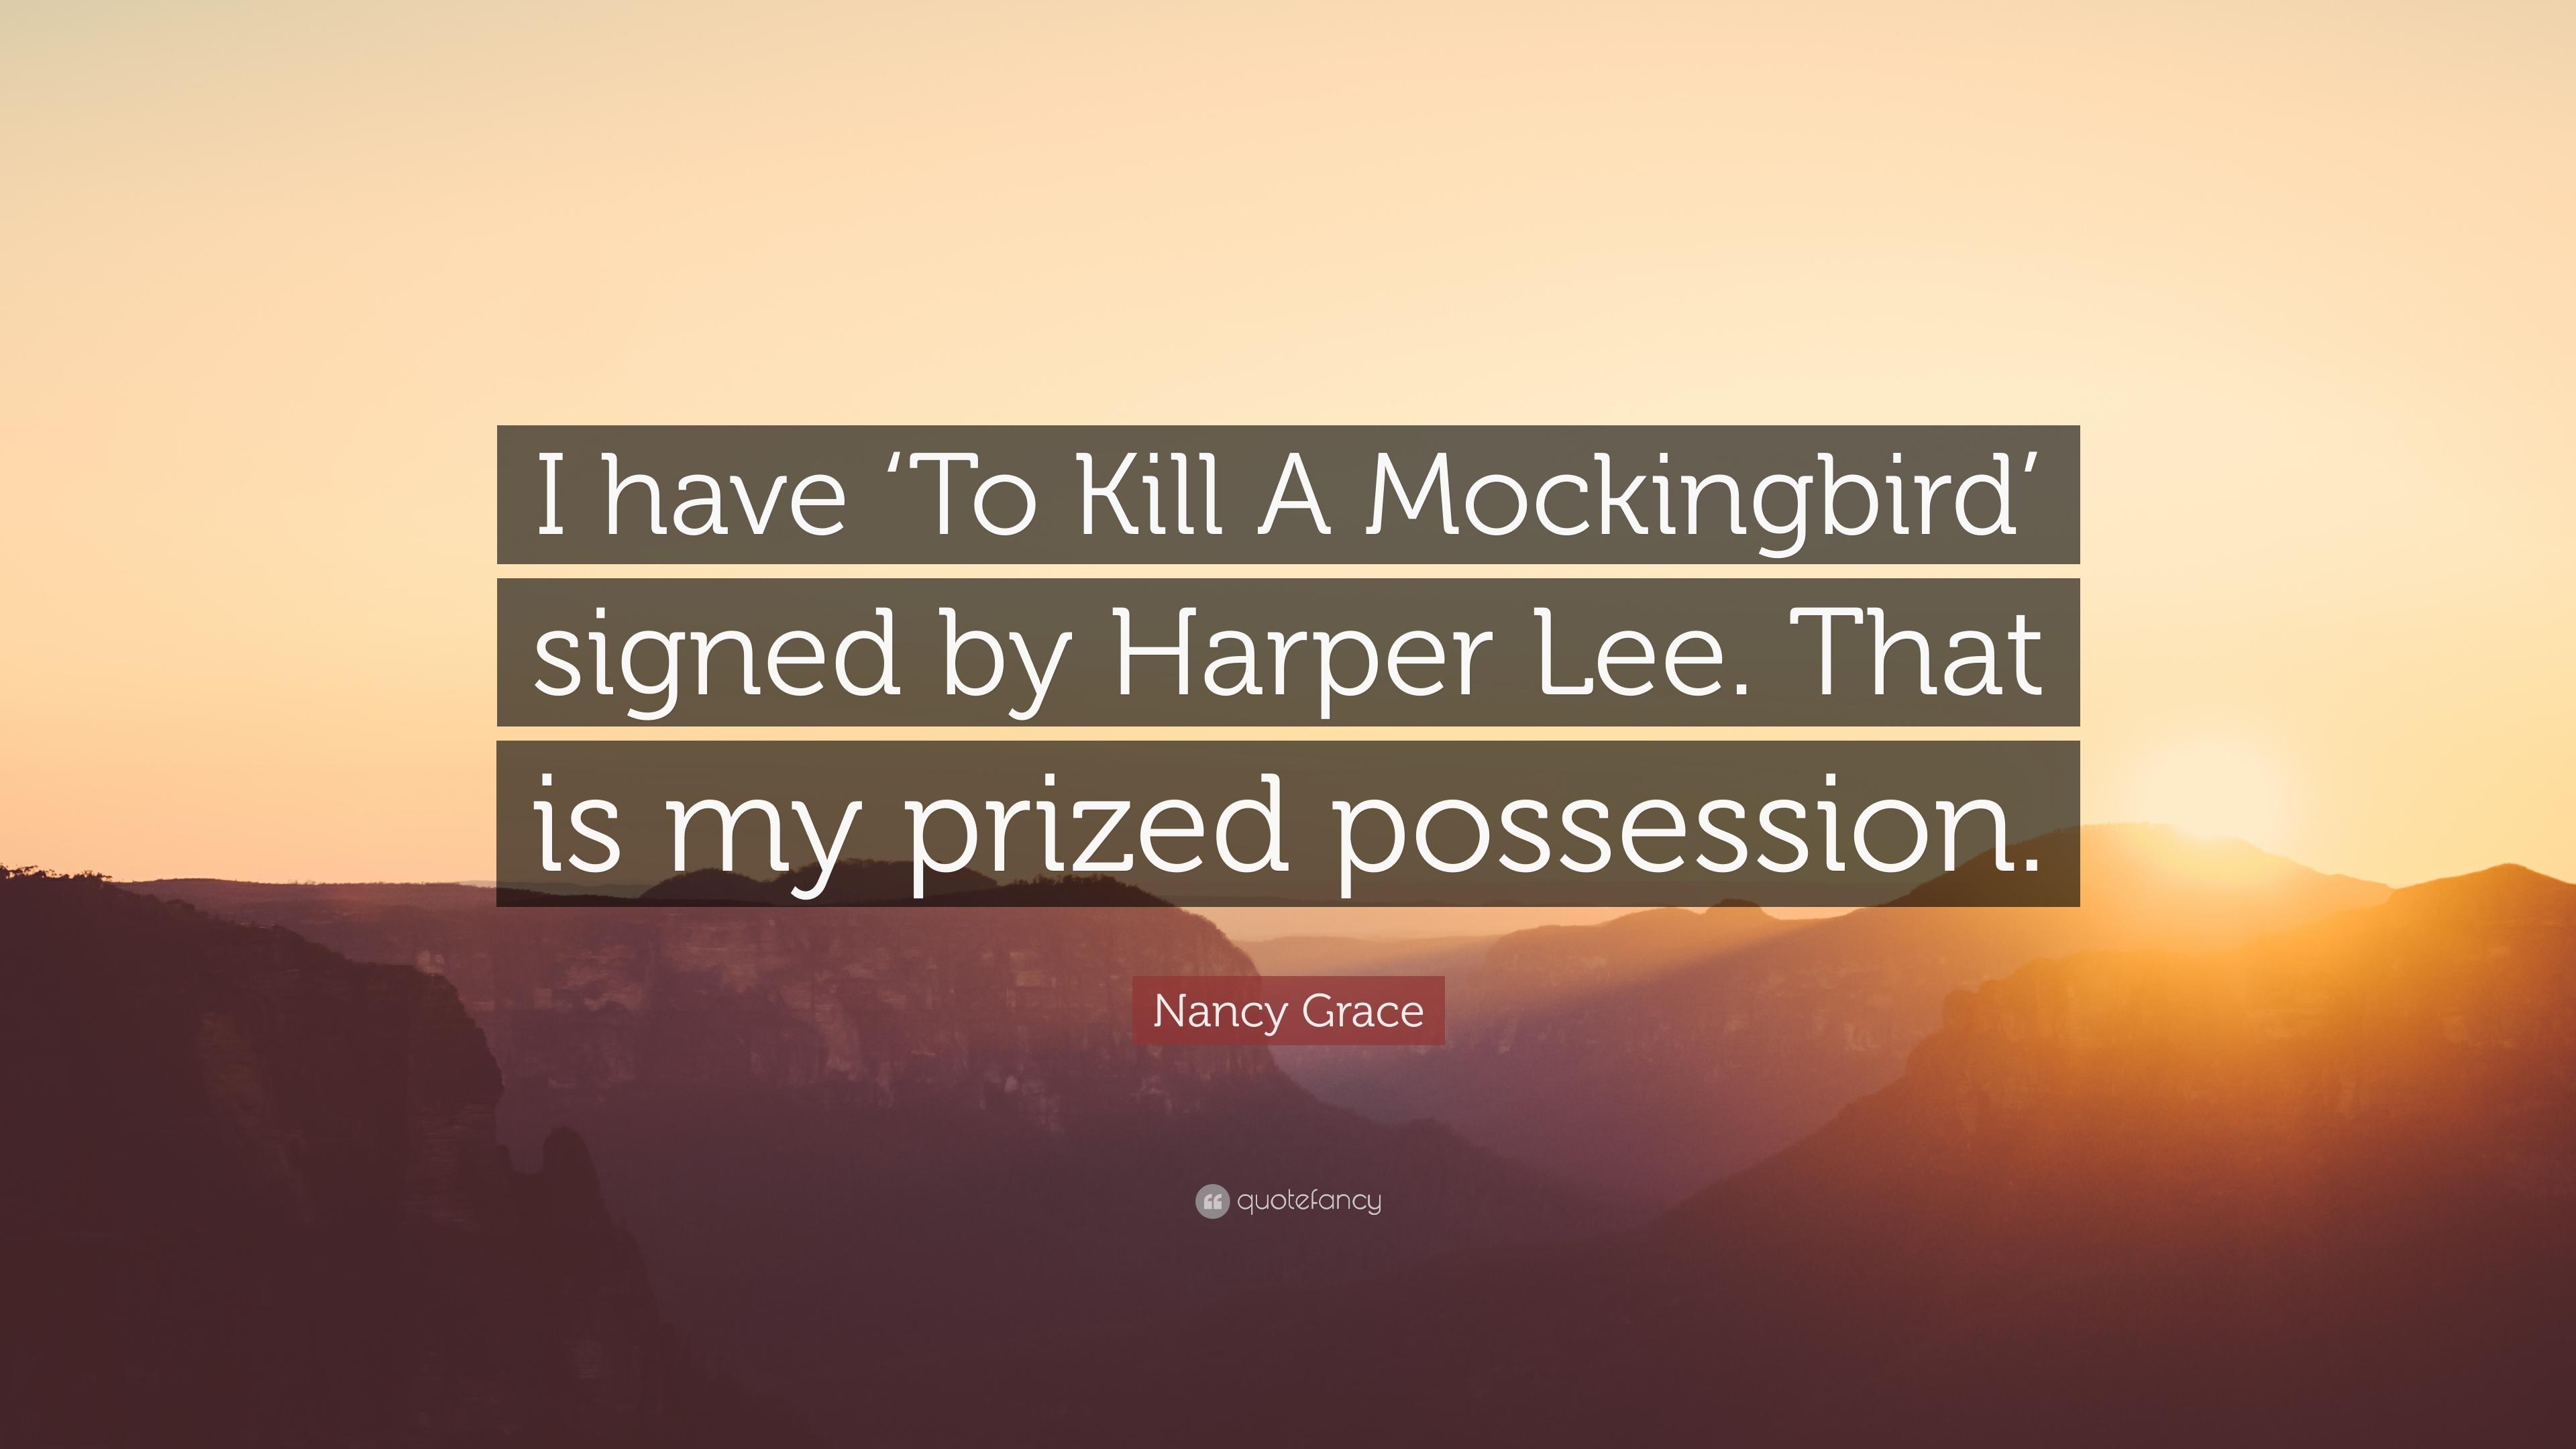 Nancy Grace Quote: “I have 'To Kill A Mockingbird' signed